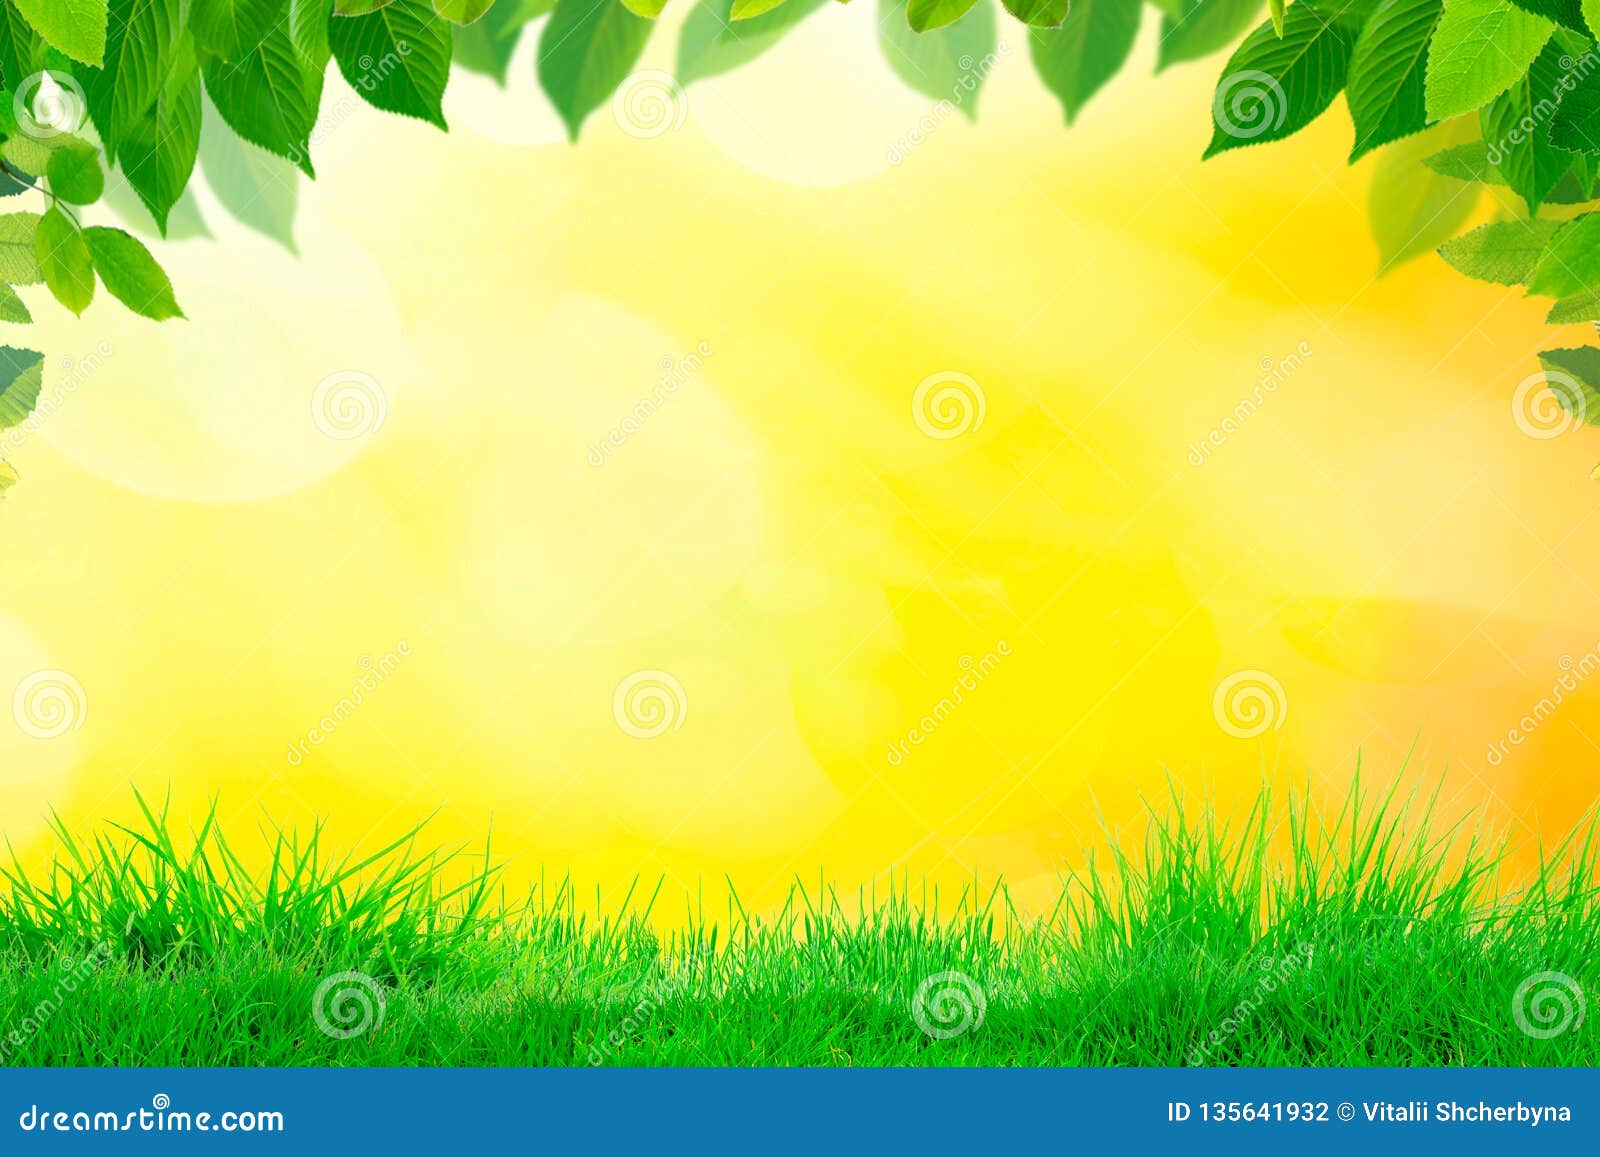 Empty Grass Top with Blur Park Yellow Nature Background Bokeh Light,Mock Up  for Display or Montage of Product,Banner or Header for Stock Photo - Image  of board, table: 135641932